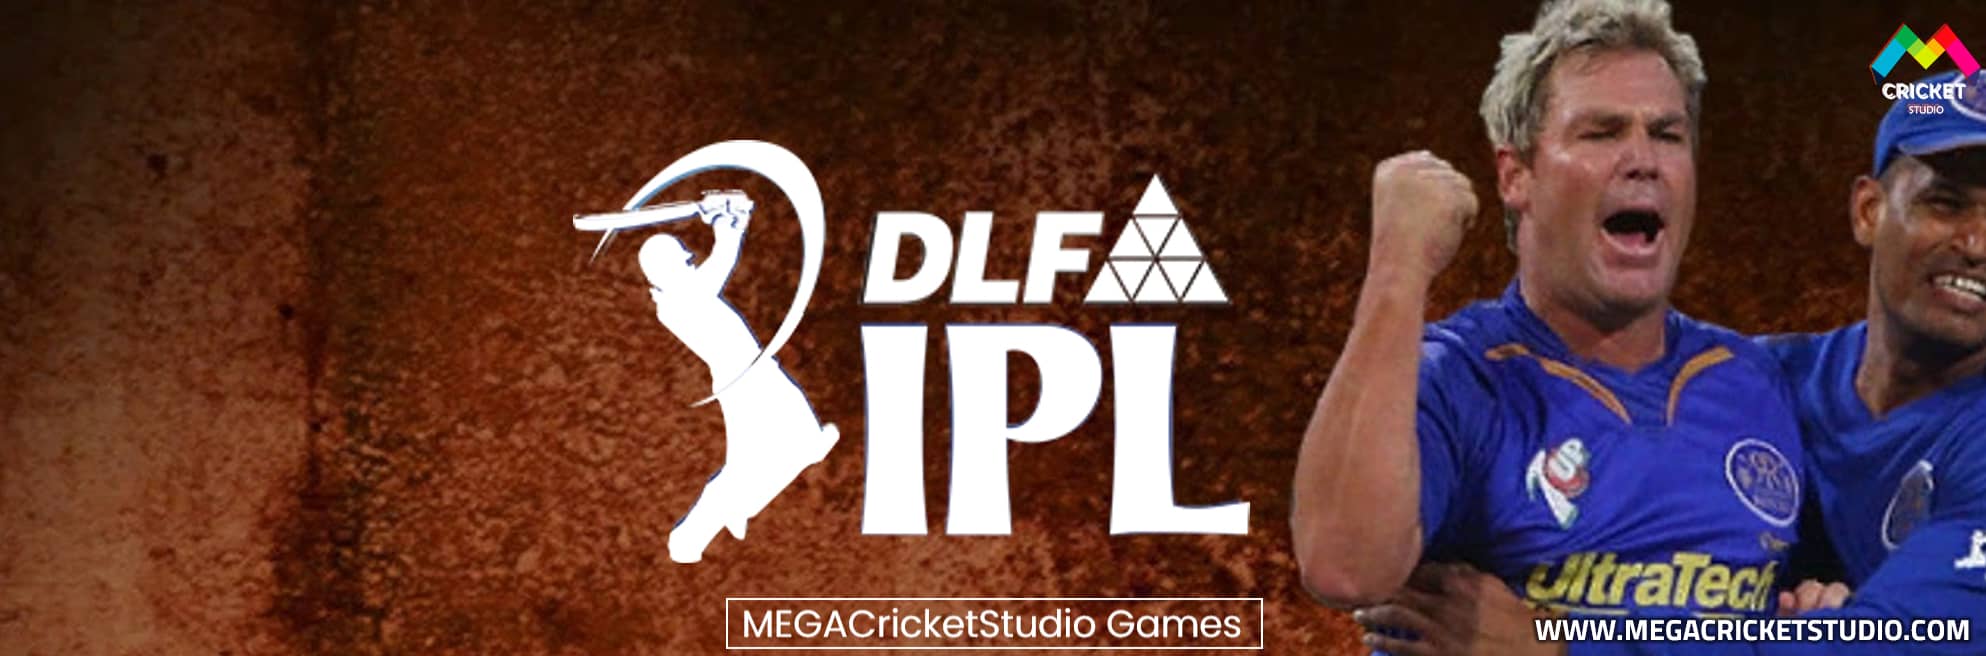 DLF IPL 2009 Patch for EA Cricket 07